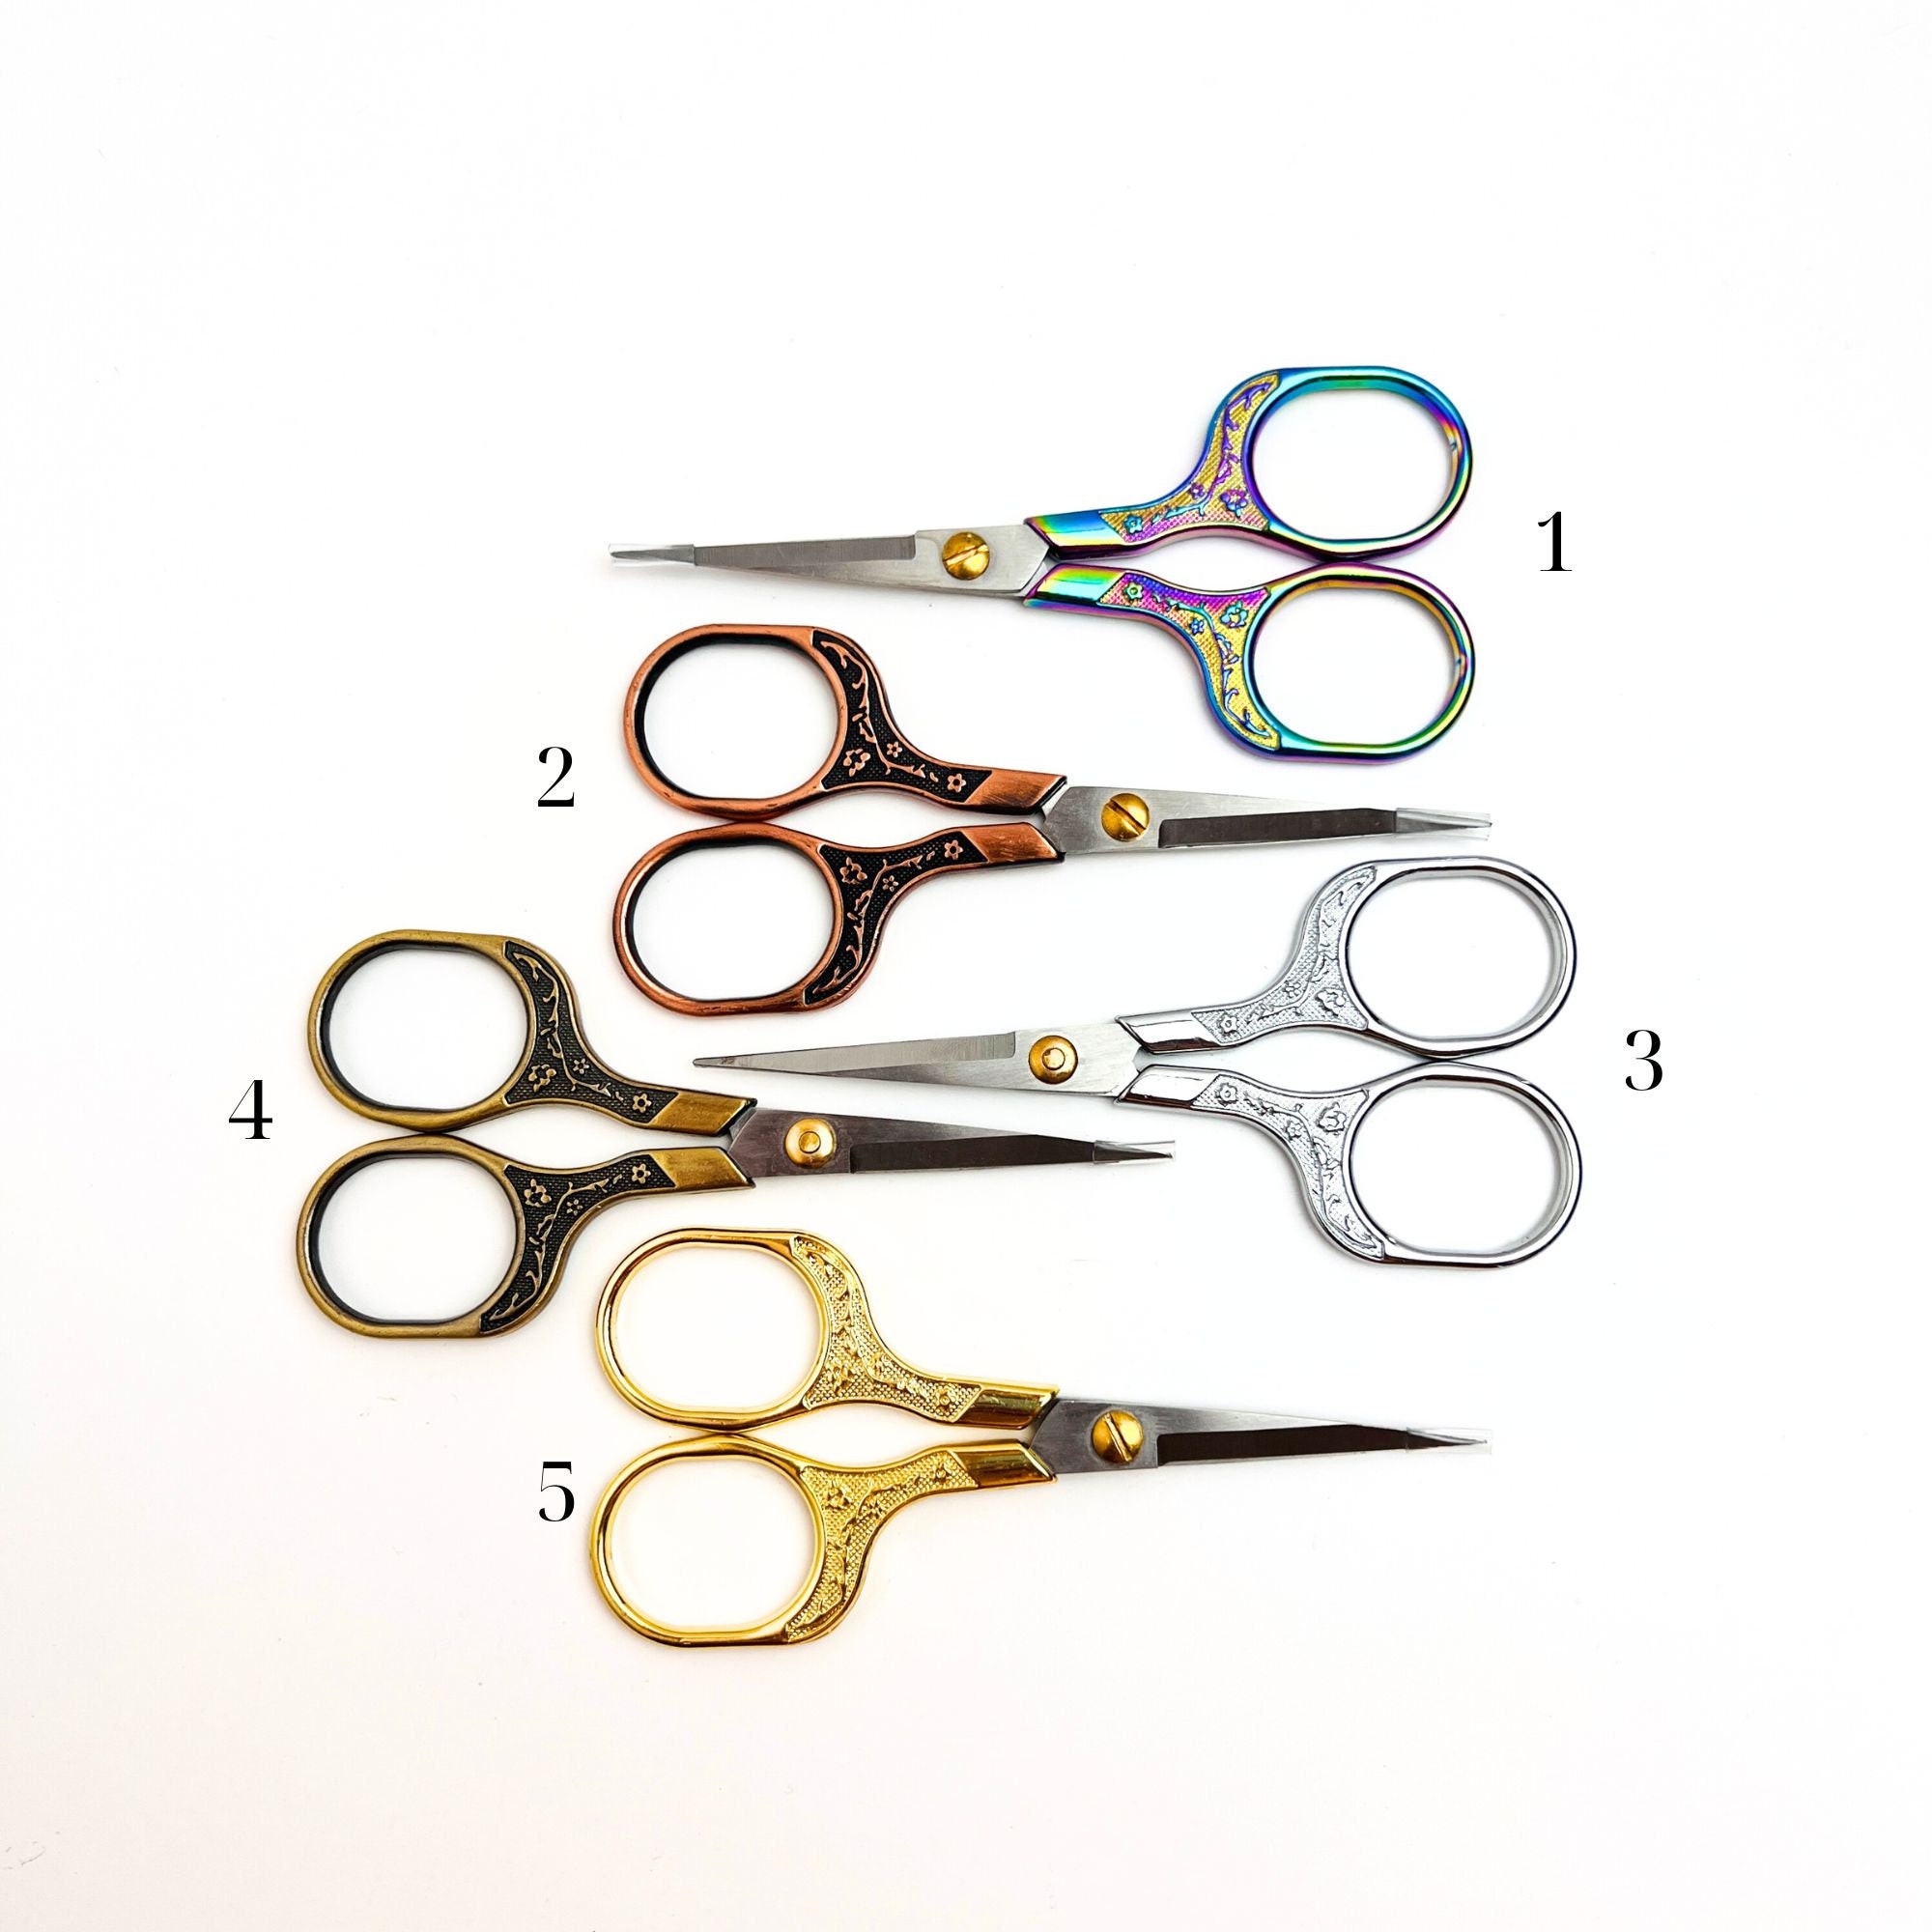 Embroidery Curved Scissors Small Scissors, Practical DIY Sewing